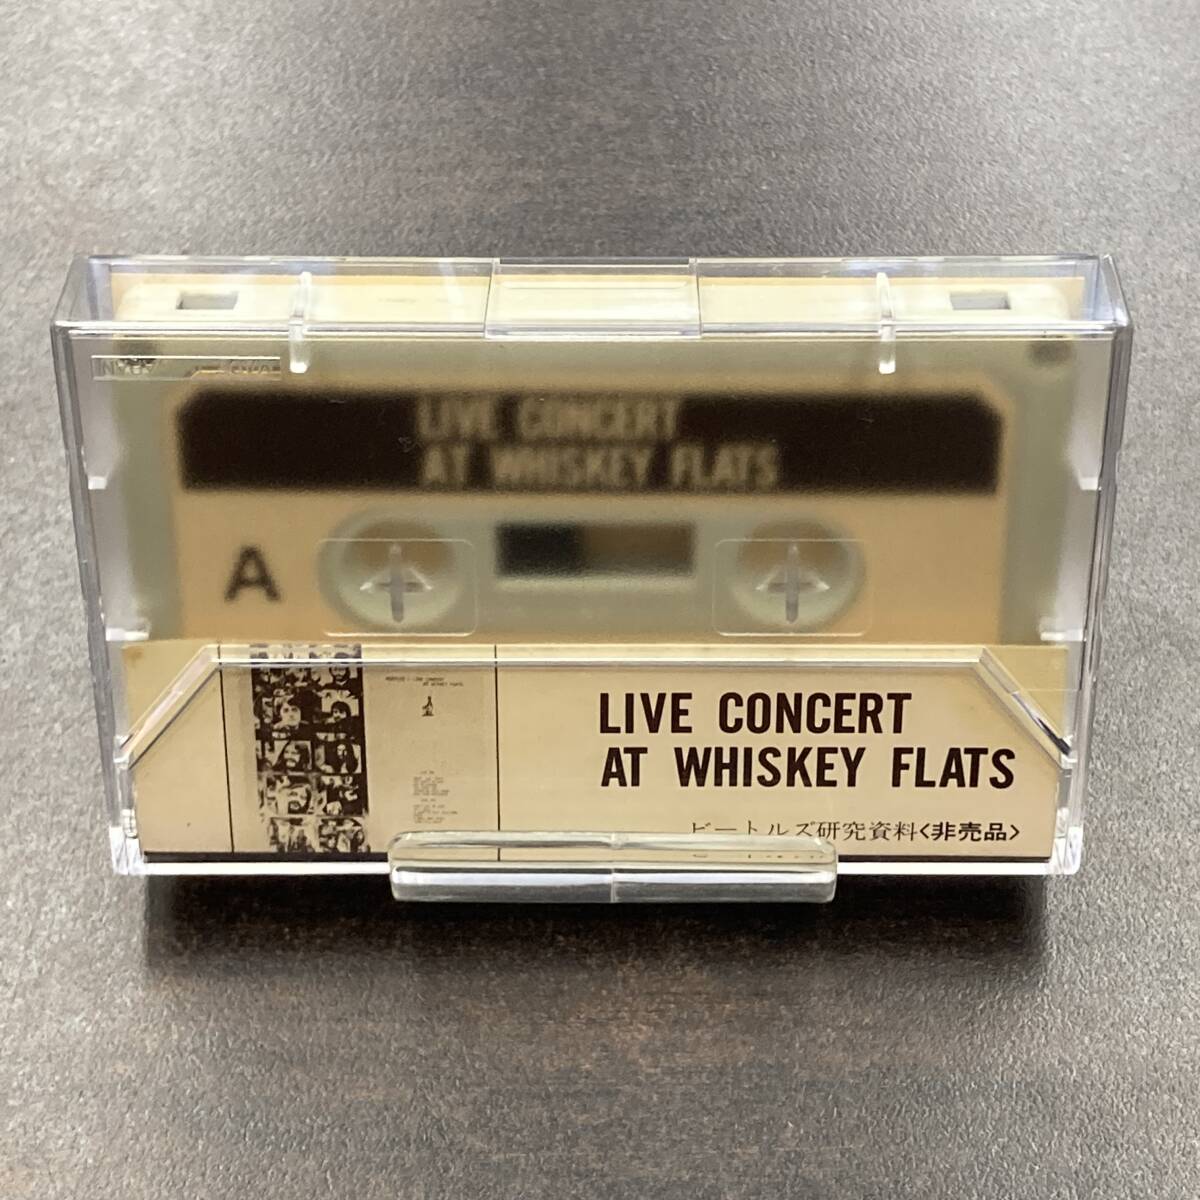 1225M ザ・ビートルズ 研究資料 THE BEATLES LIVE CONCERT AT WHISKEY FLATS / THE BEATLES Research materials Cassette Tapeの画像5